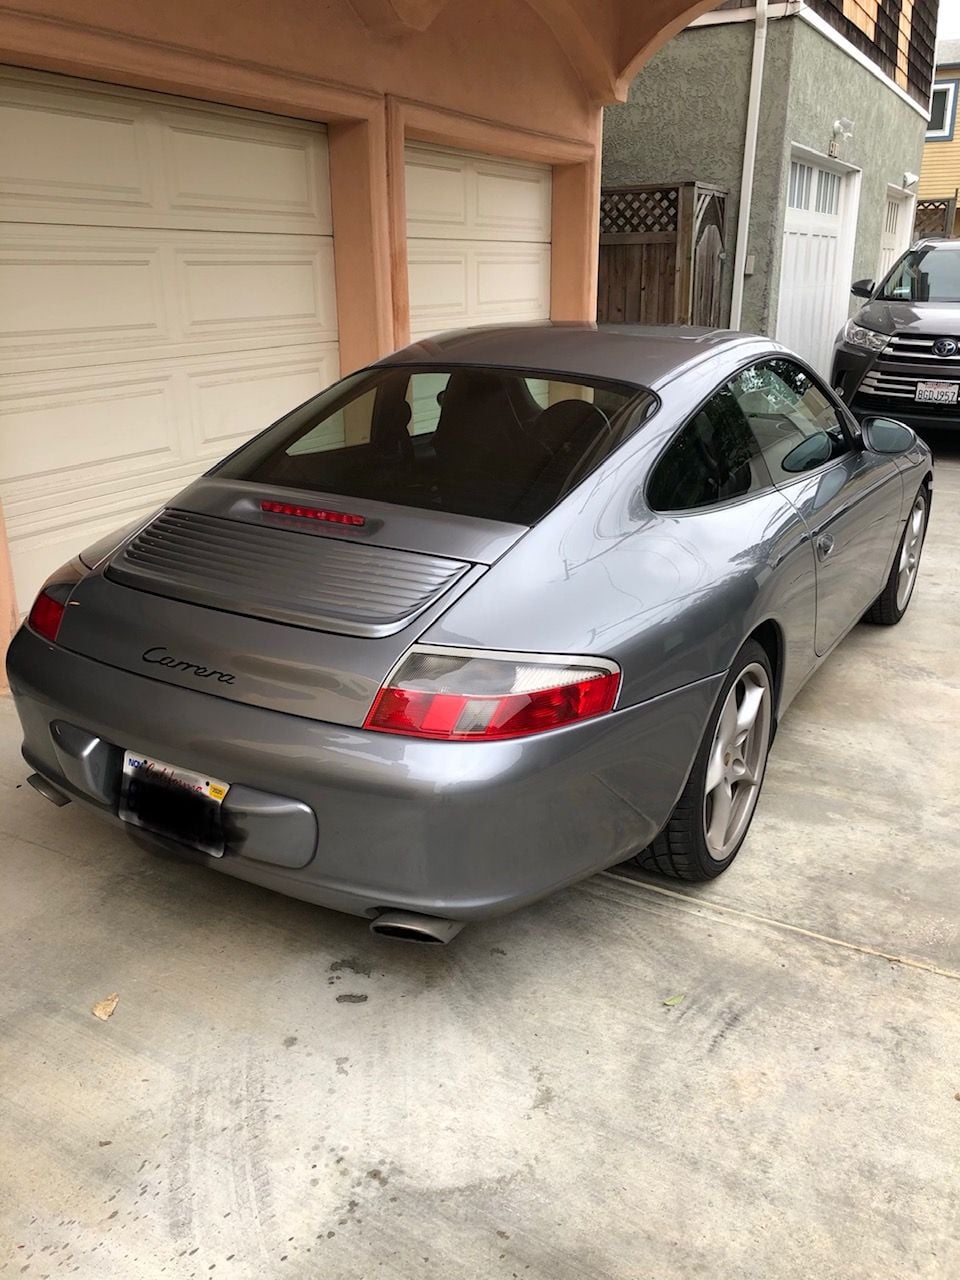 2003 Porsche 911 - 2003 911 C2 Manual (Seal Gray Met / Black) - Used - VIN WP0AA29983S620103 - 99,640 Miles - 6 cyl - 2WD - Manual - Coupe - Gray - Long Beach, CA 90803, United States